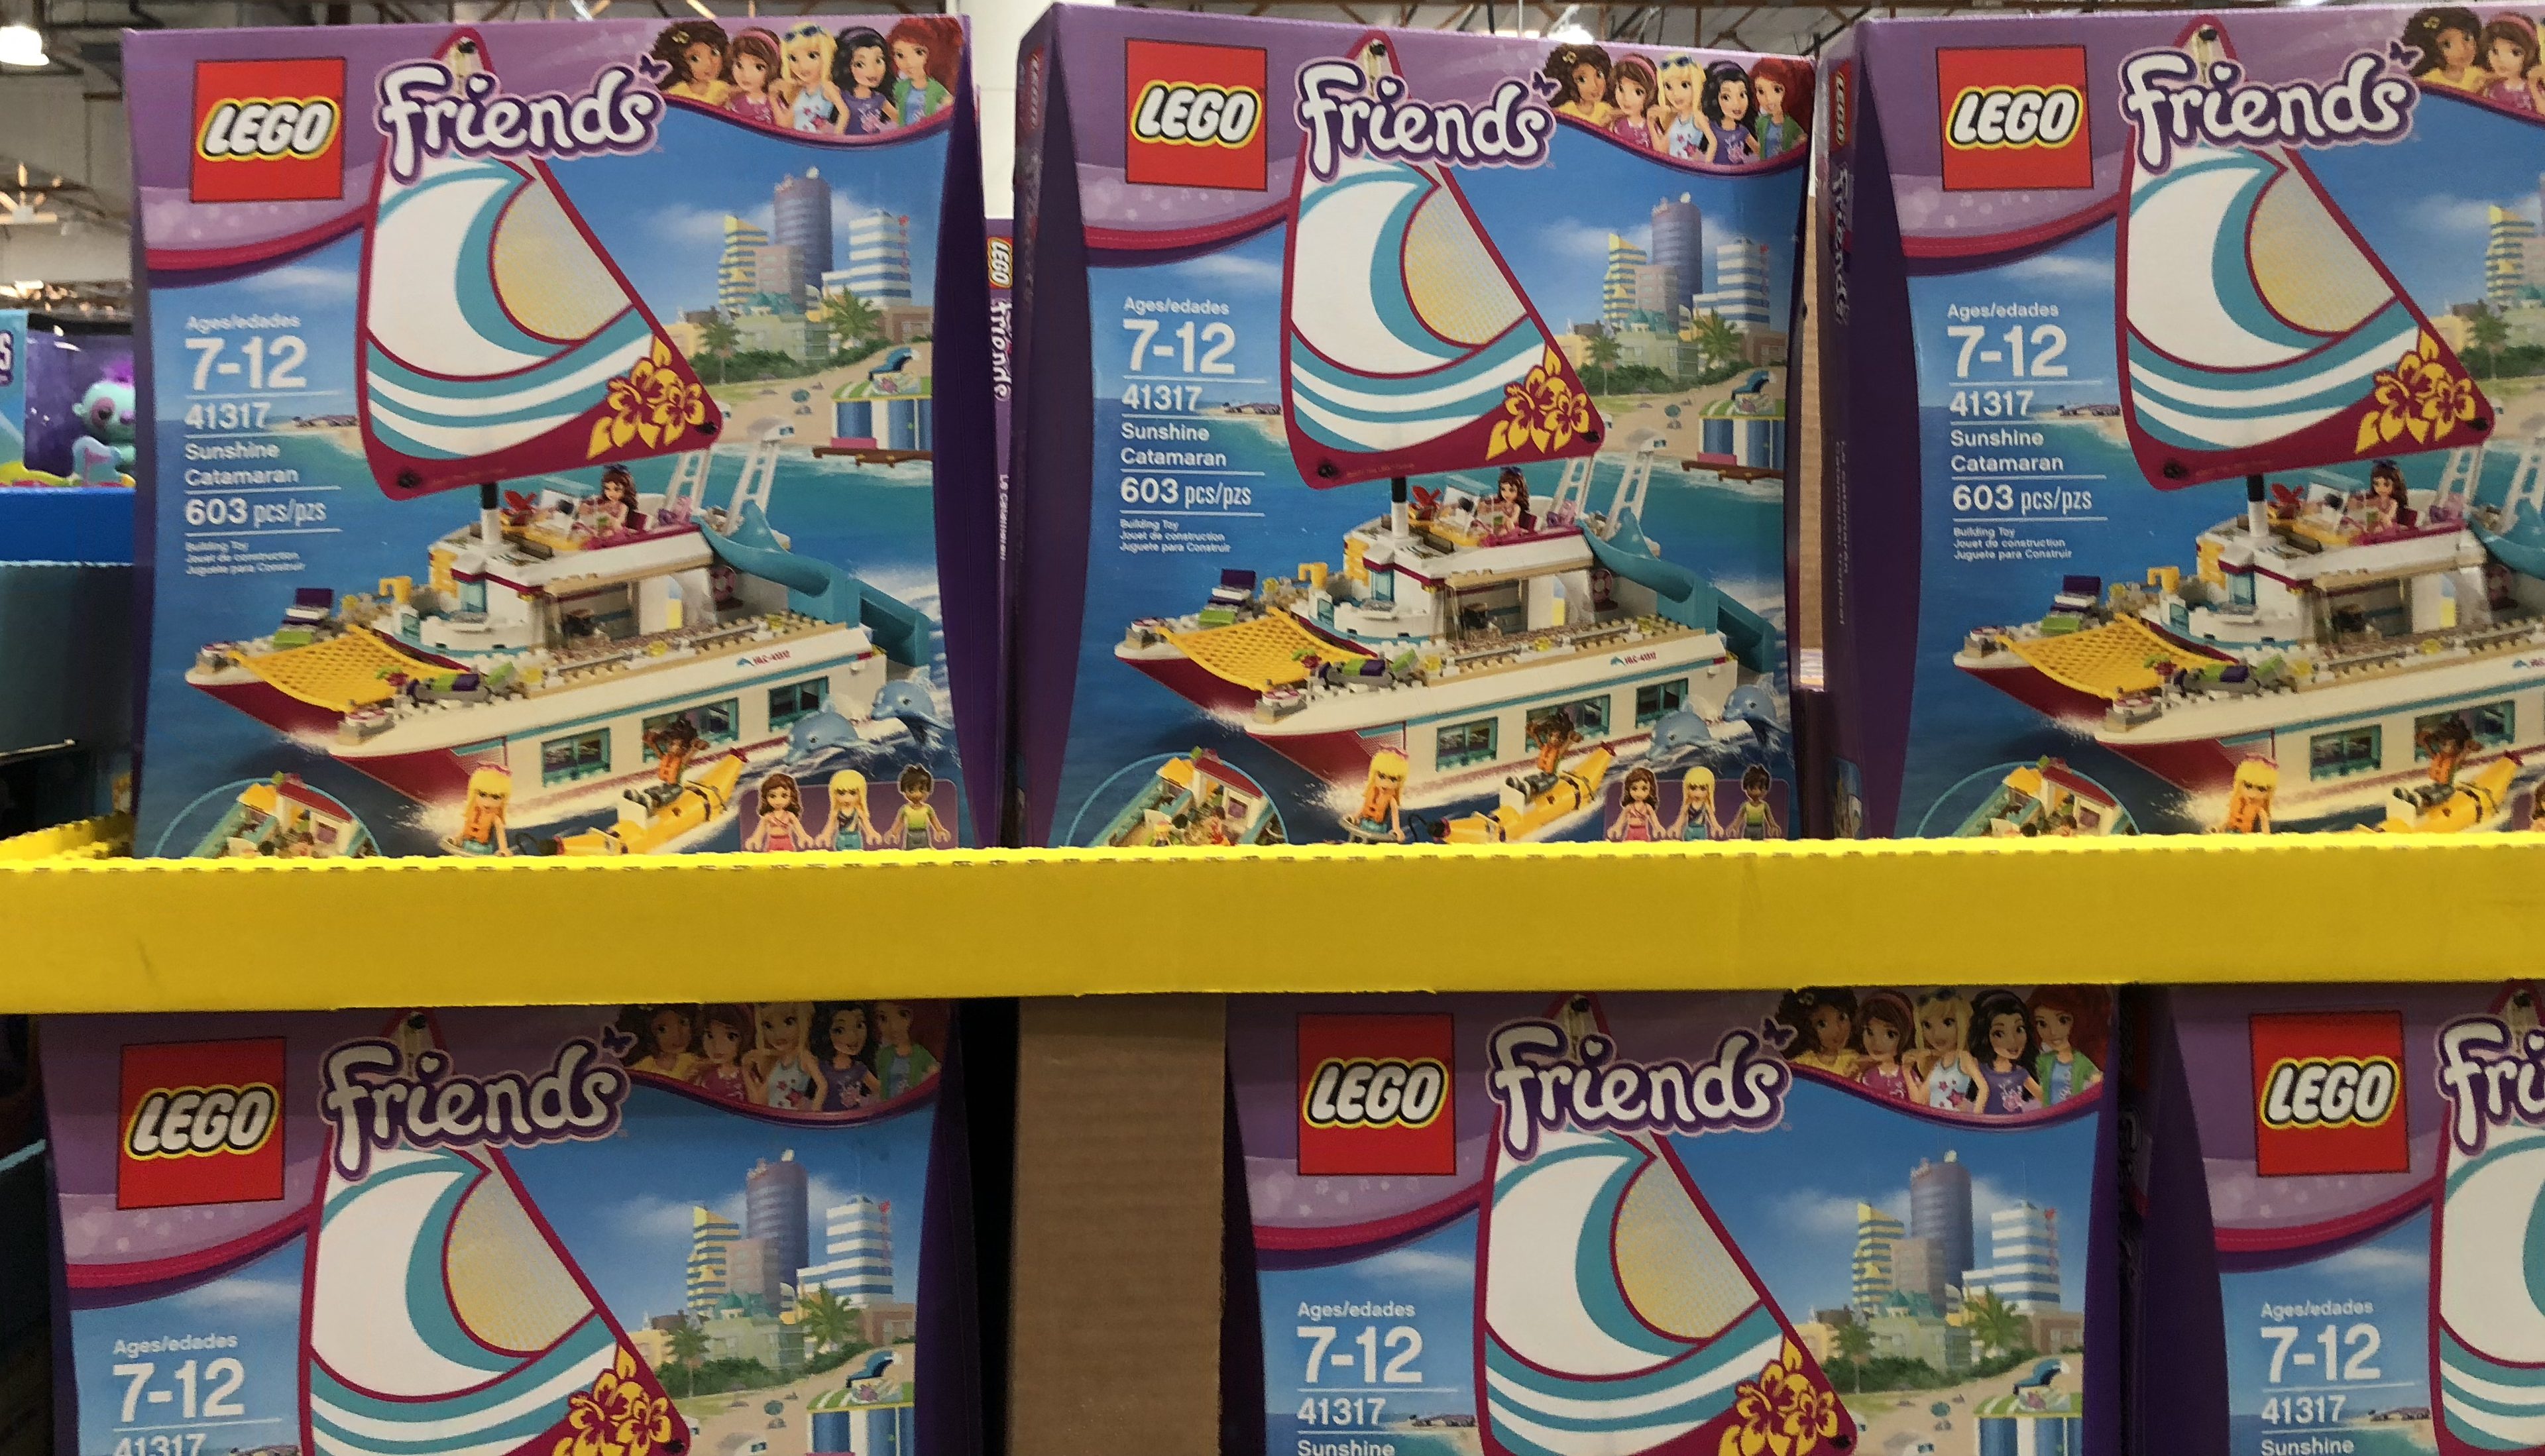 The best holiday toy deals for 2018 include the LEGO Friends Catamaran at Costco